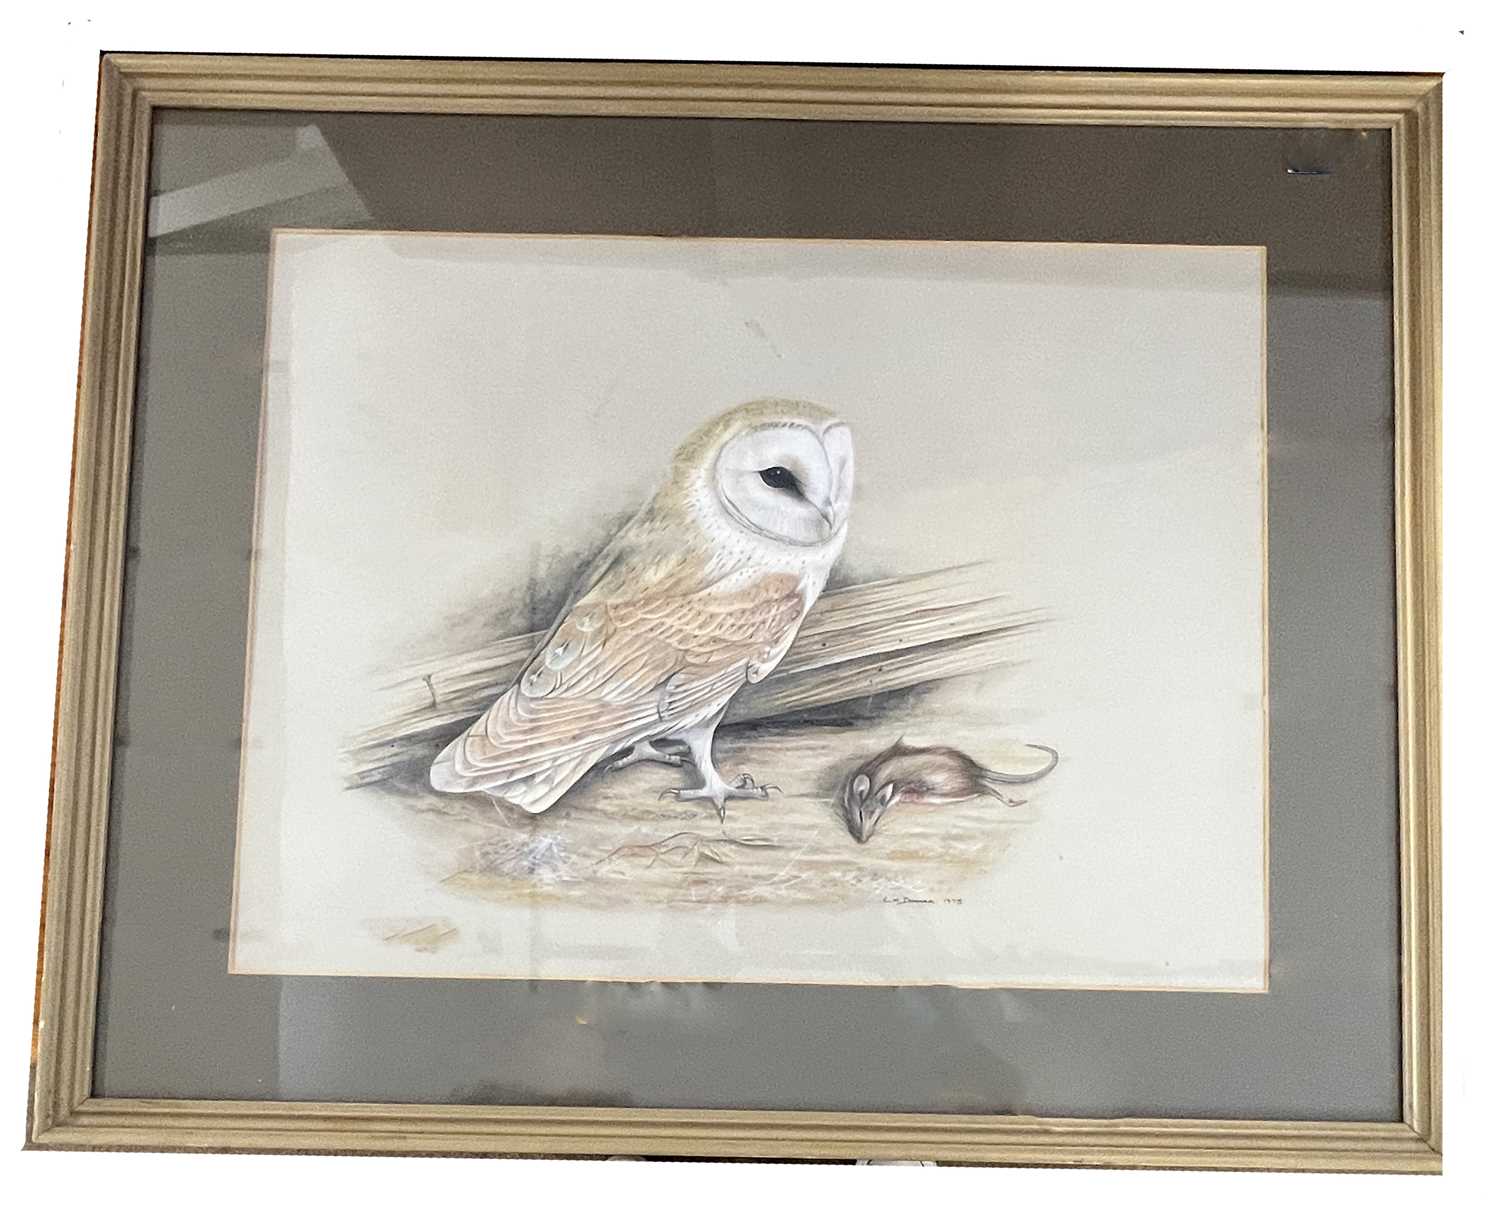 Carl Donner (British, b.1957), a Barn Owl with prey, watercolour, signed and dated 1975, - Image 2 of 2